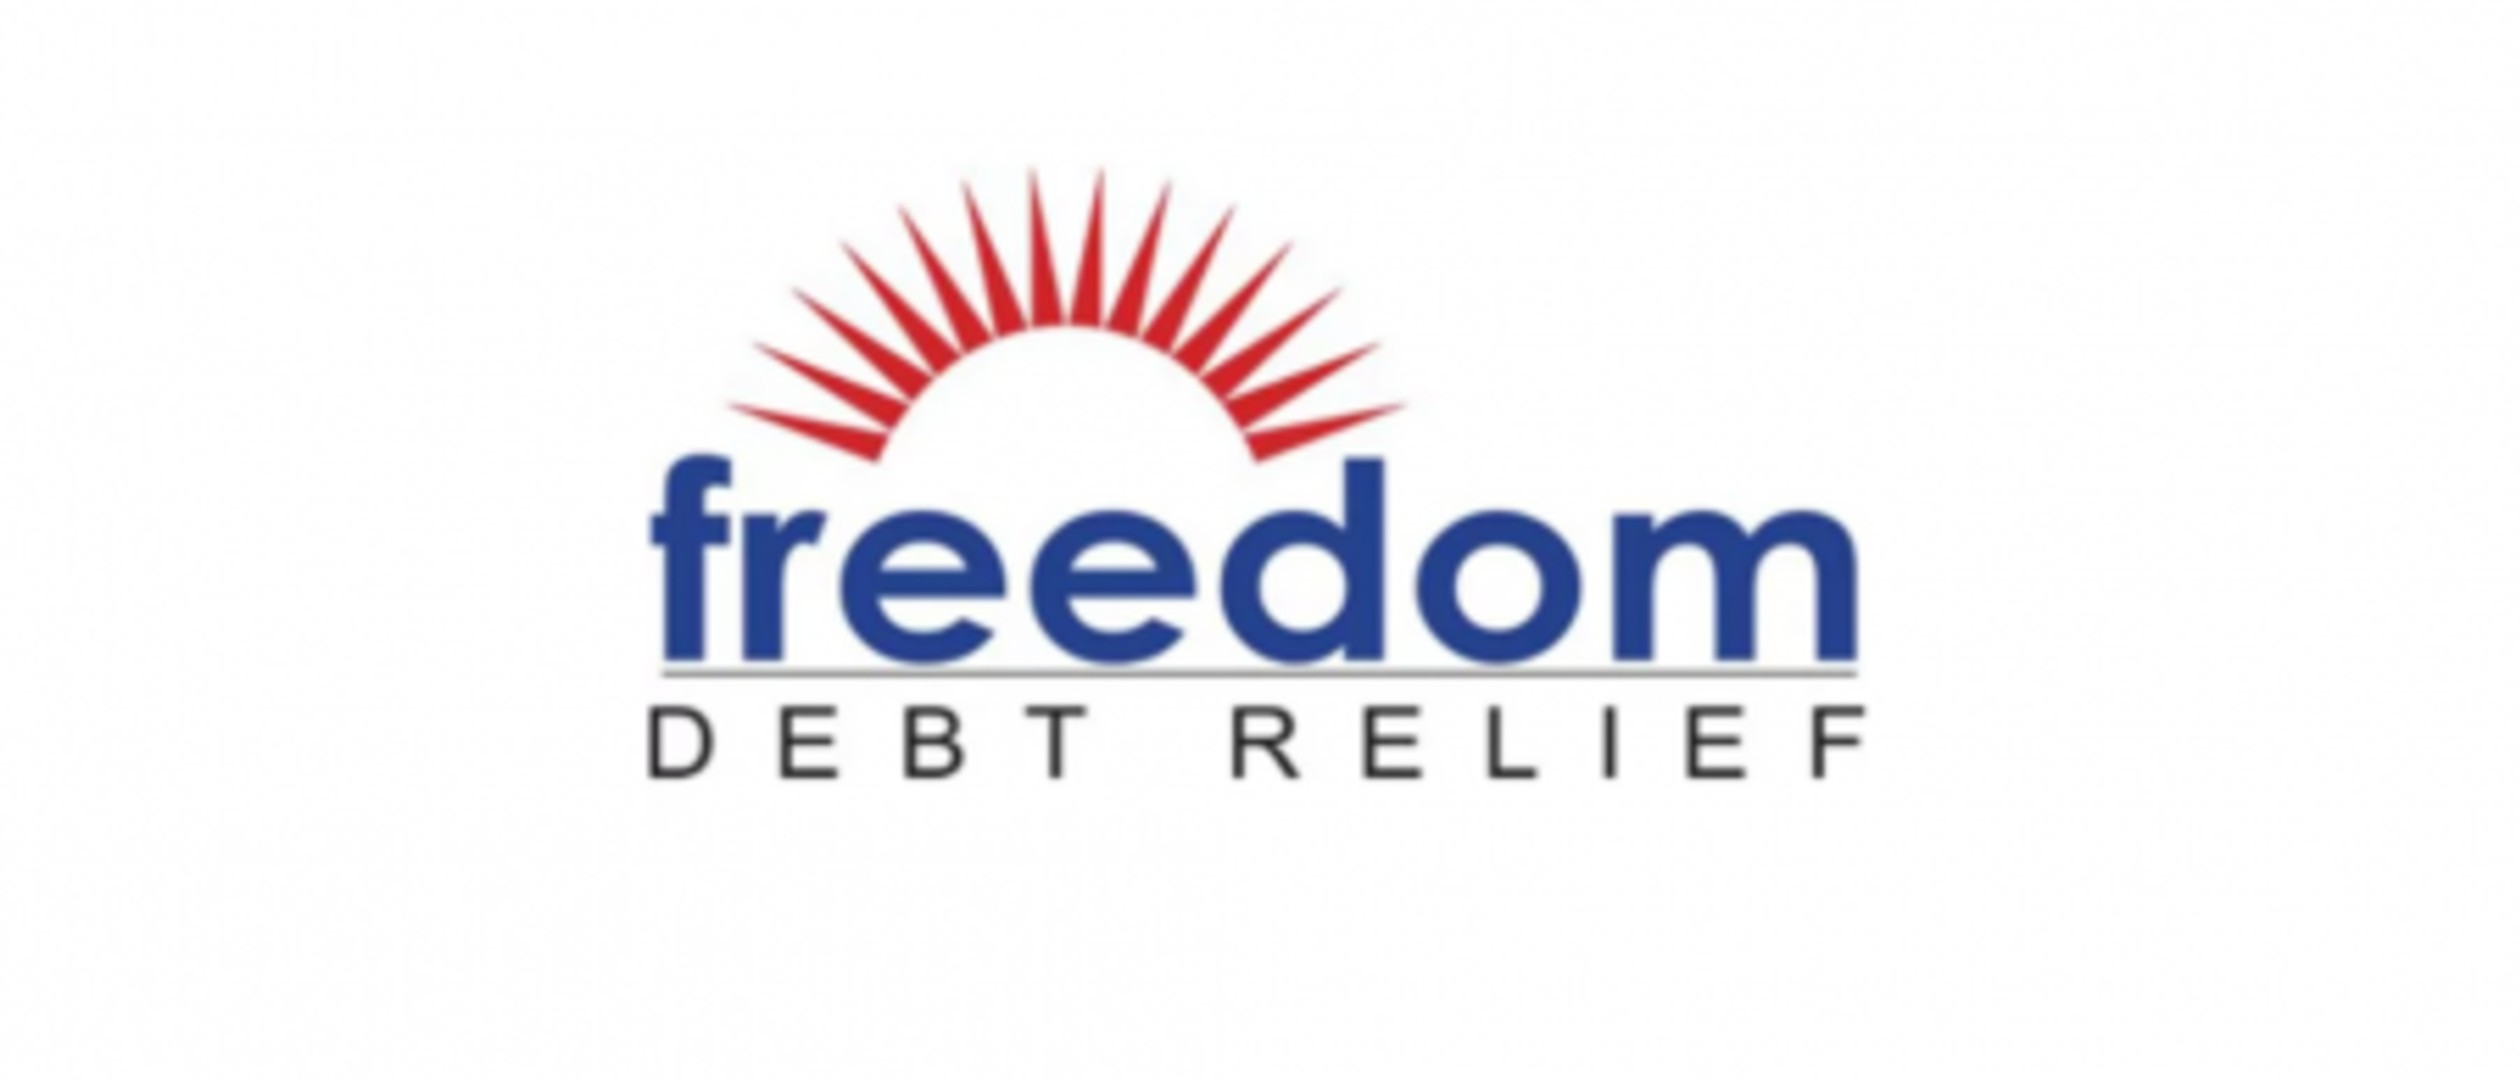 reviews on dom debt relief